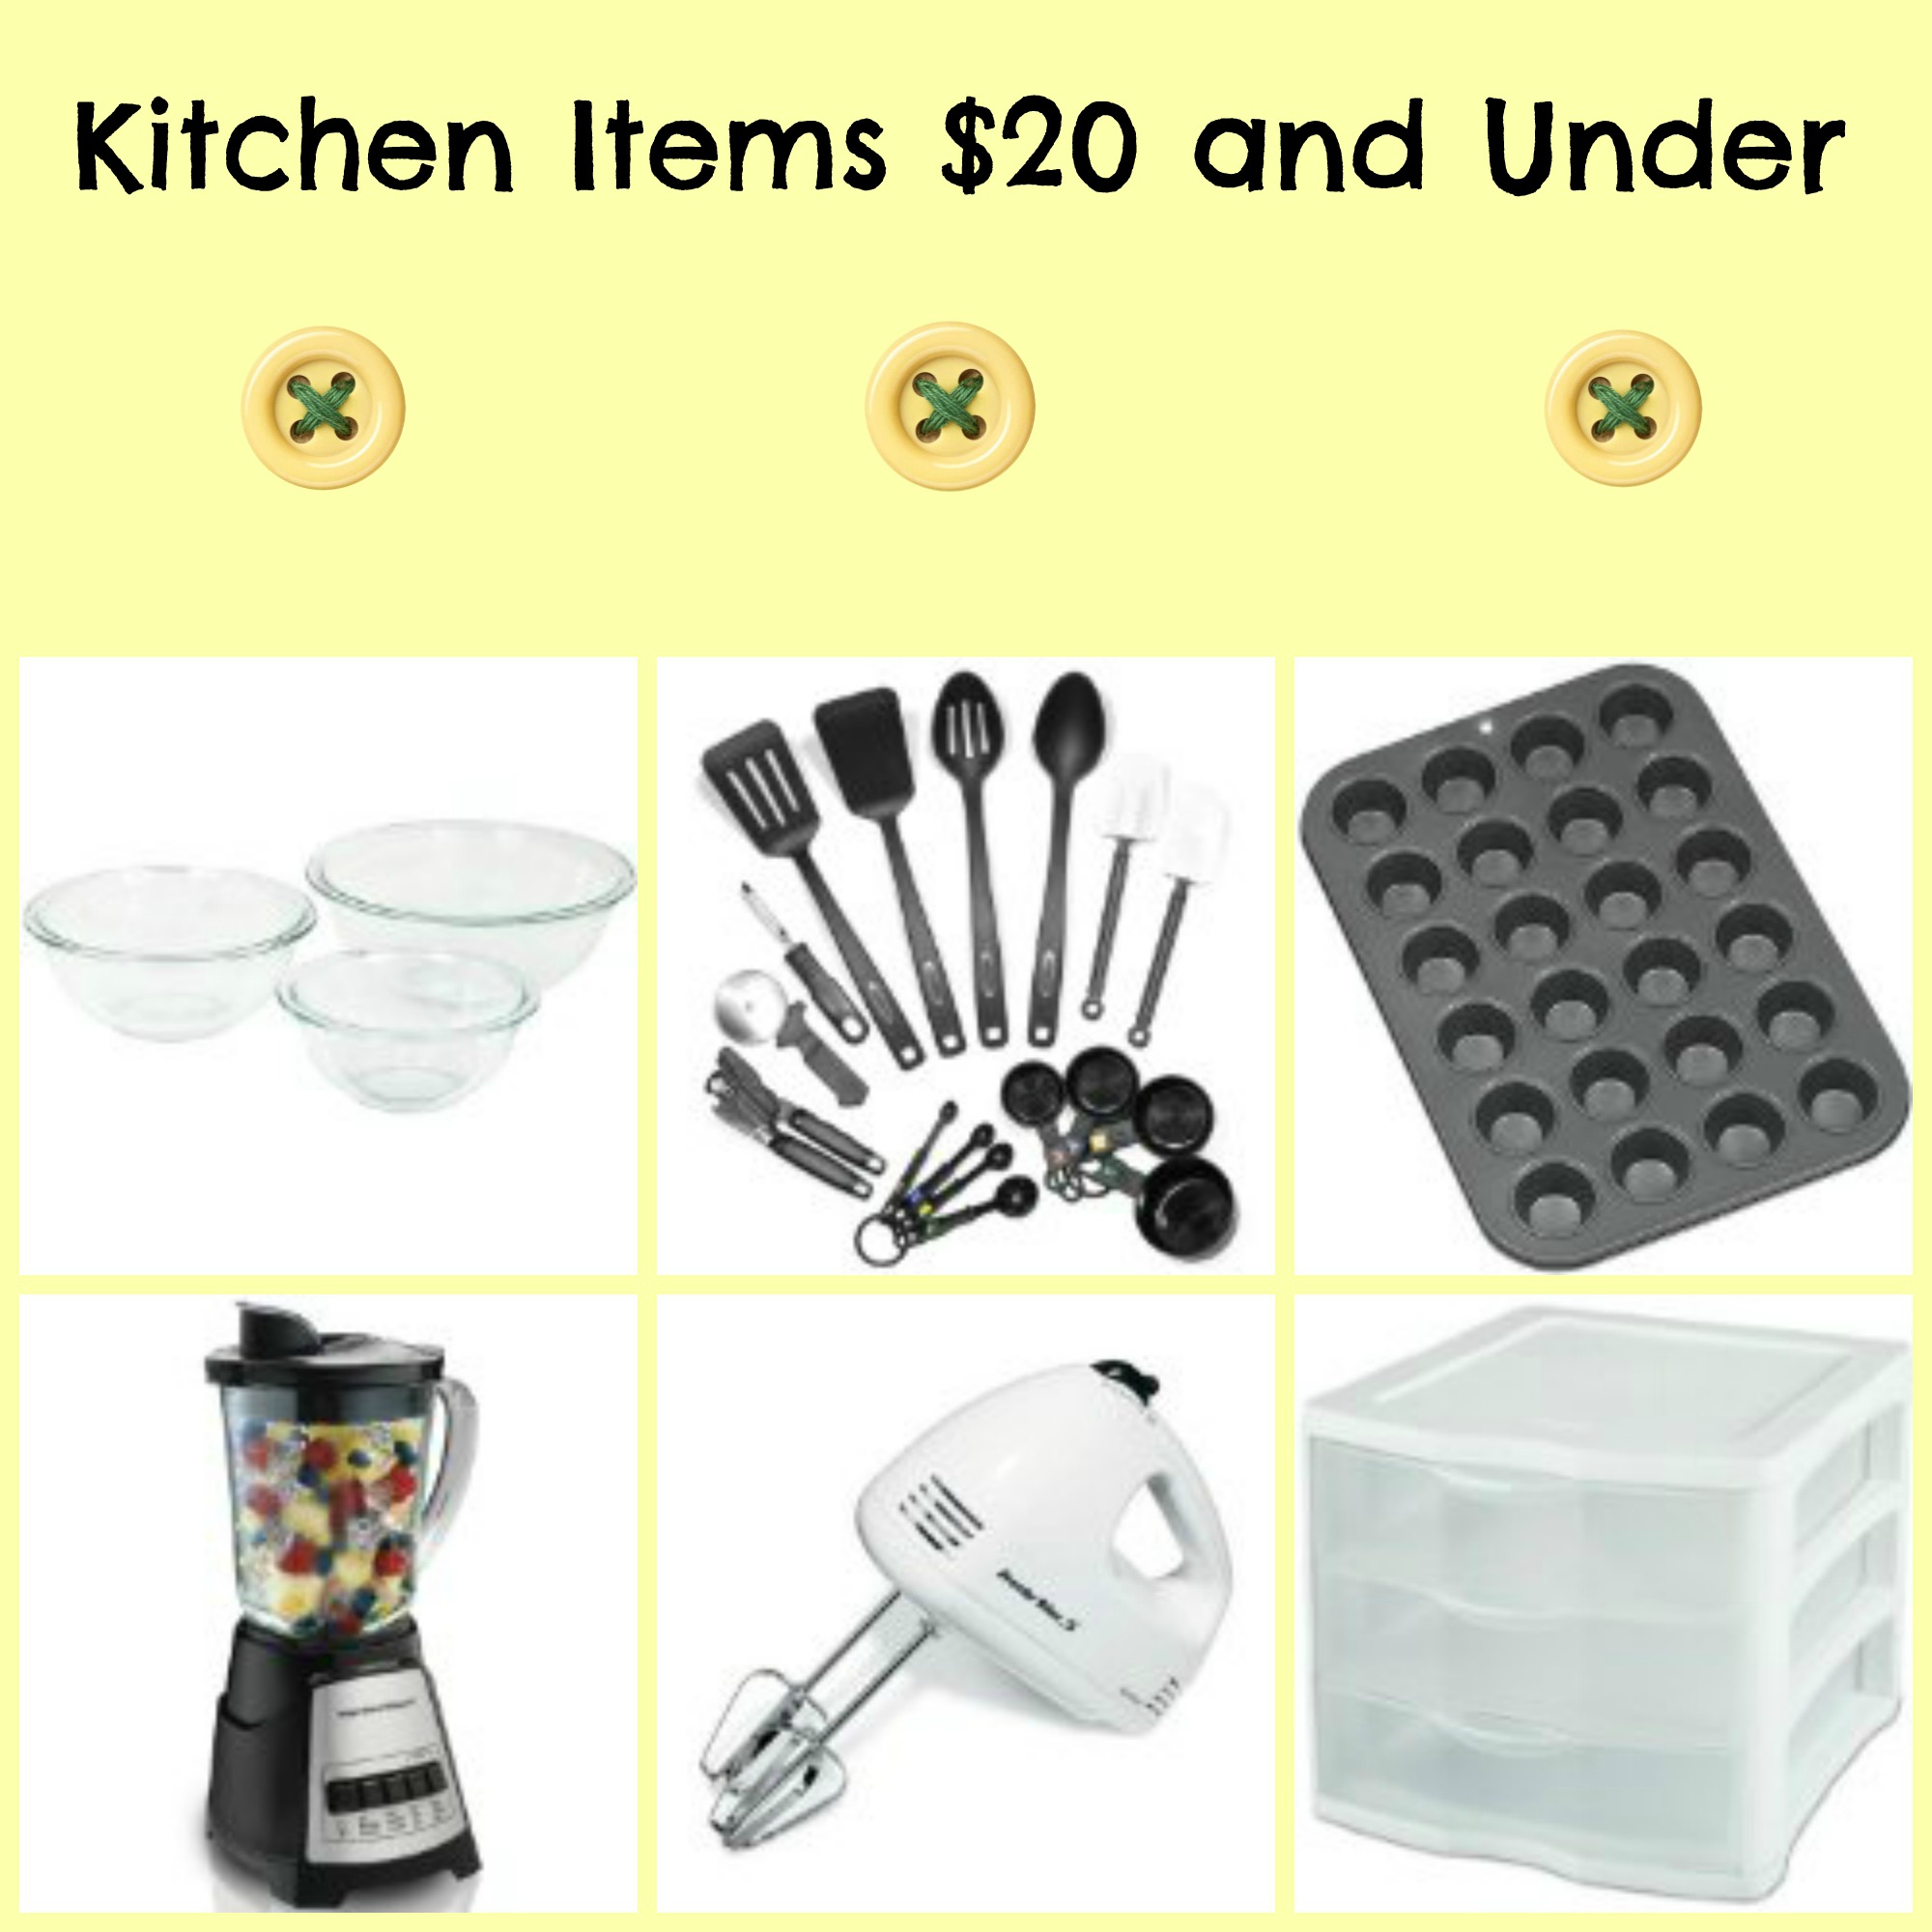 Kitchen Deals on Amazon for $20 or Less!